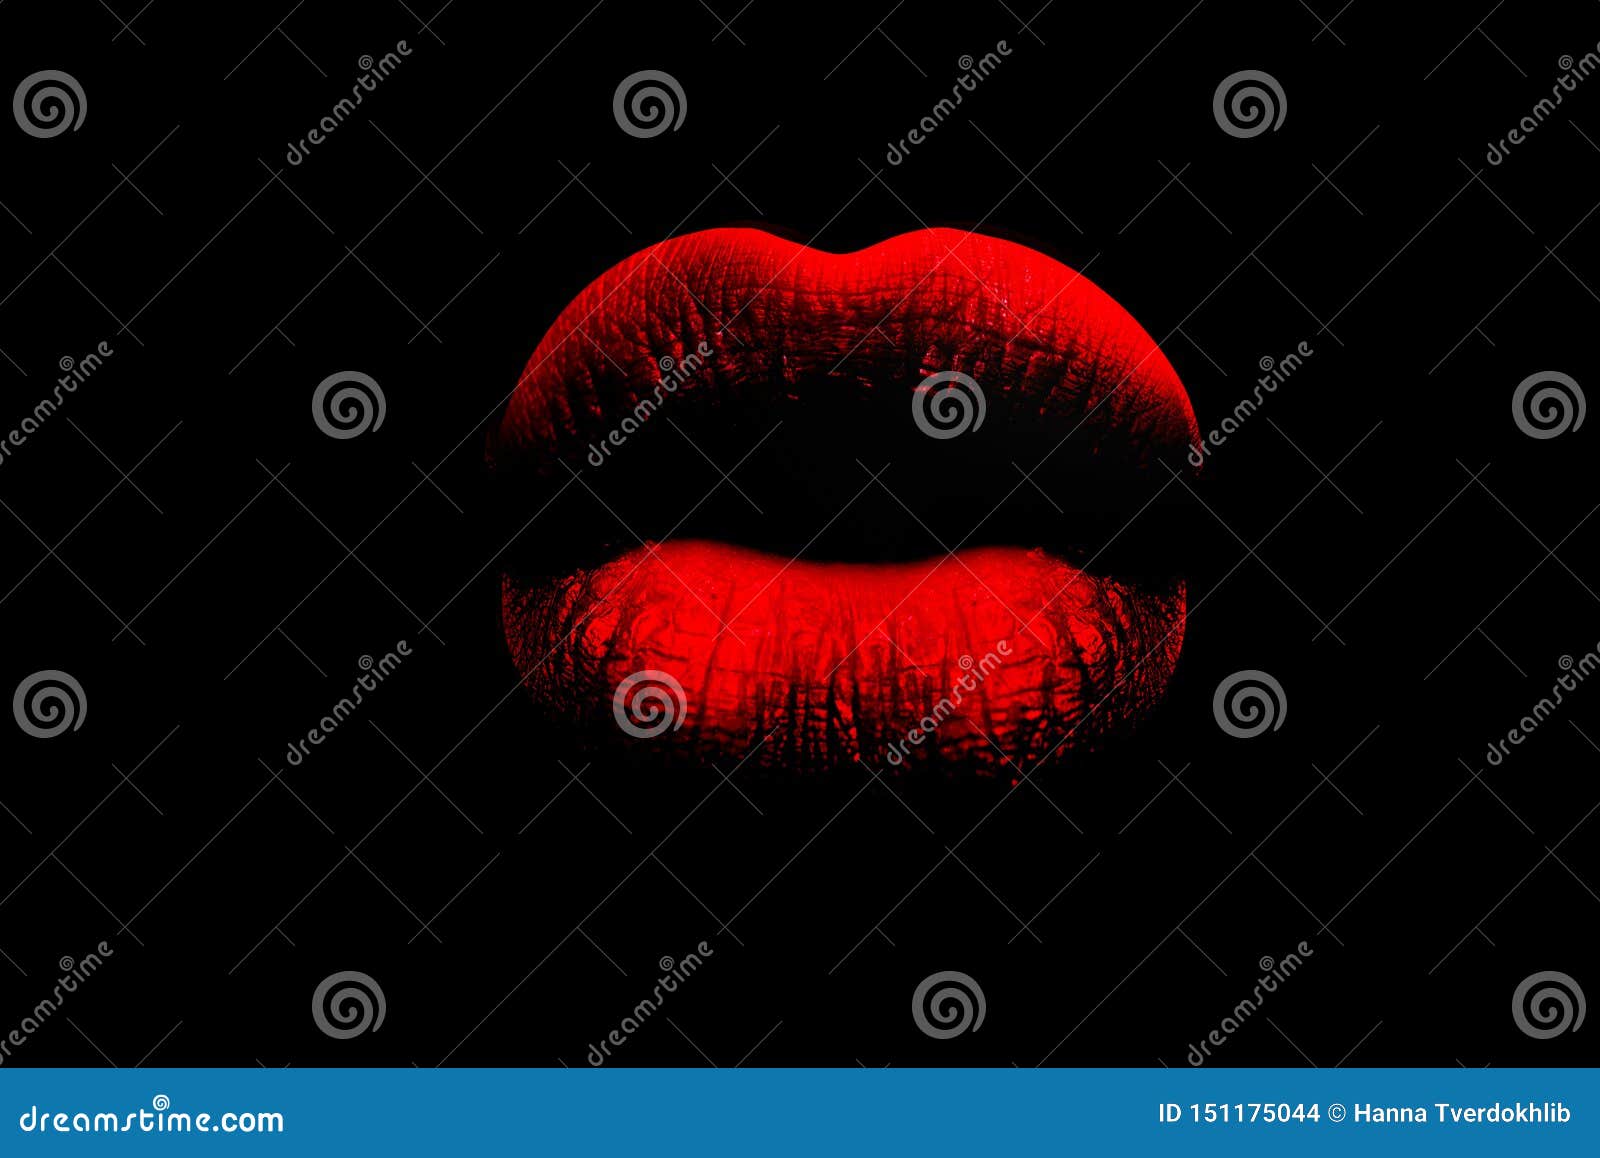 red full lips on black background. the woman`s lips. lush lips like a kiss. red and pouting. erotica, sex, temptation.